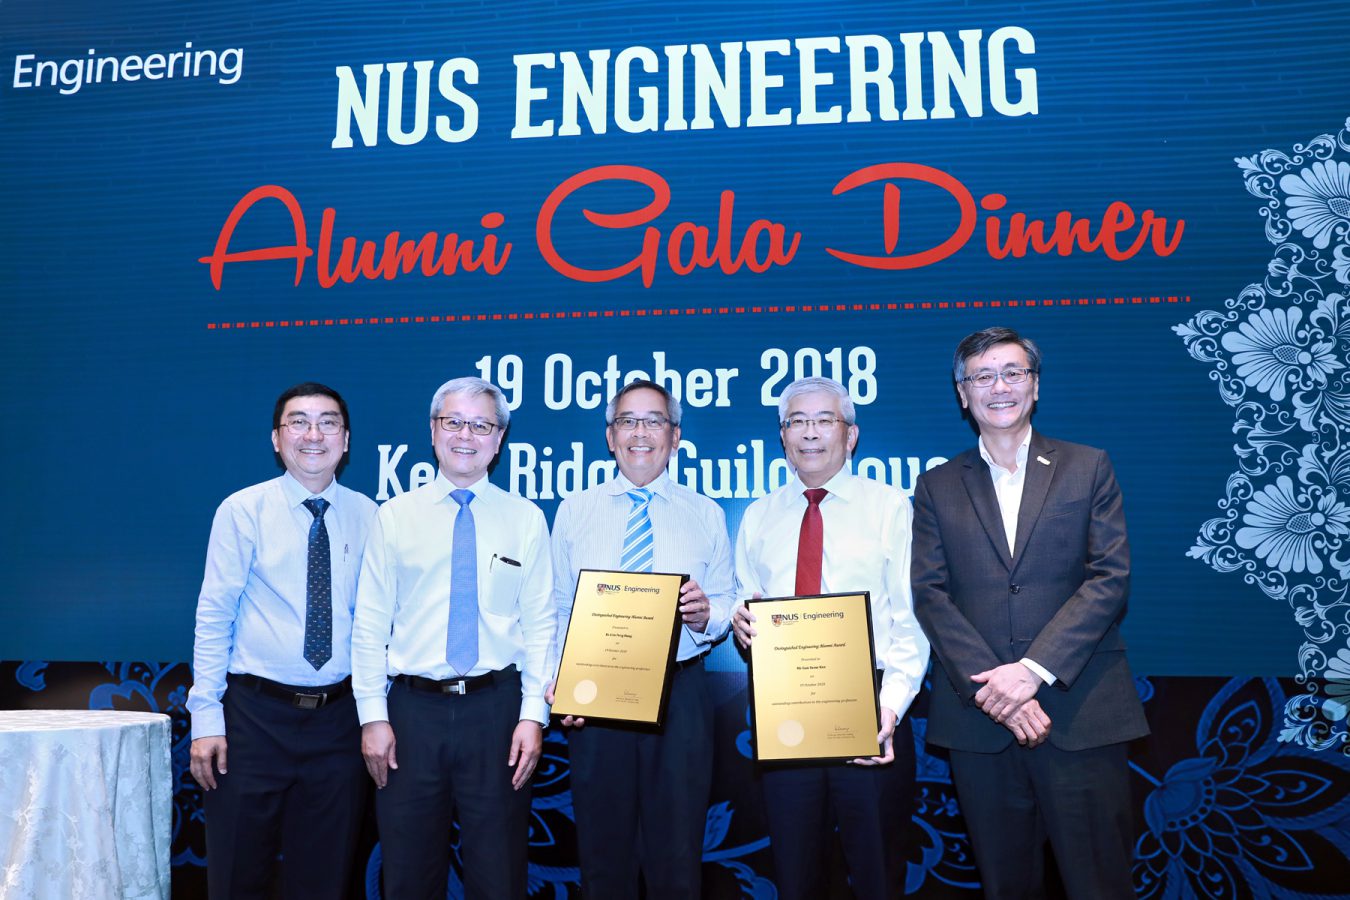 <div>Distinguished Engineering Alumni Award recipients Er Lim Peng Hong (3rd from left) and Mr Gan Seow Kee (4th from left) with NUS Engineering Professor David Chua and Dean Professor</div><div>Chua Kee Chaing and NUS President Professor Tan Eng Chye.</div>